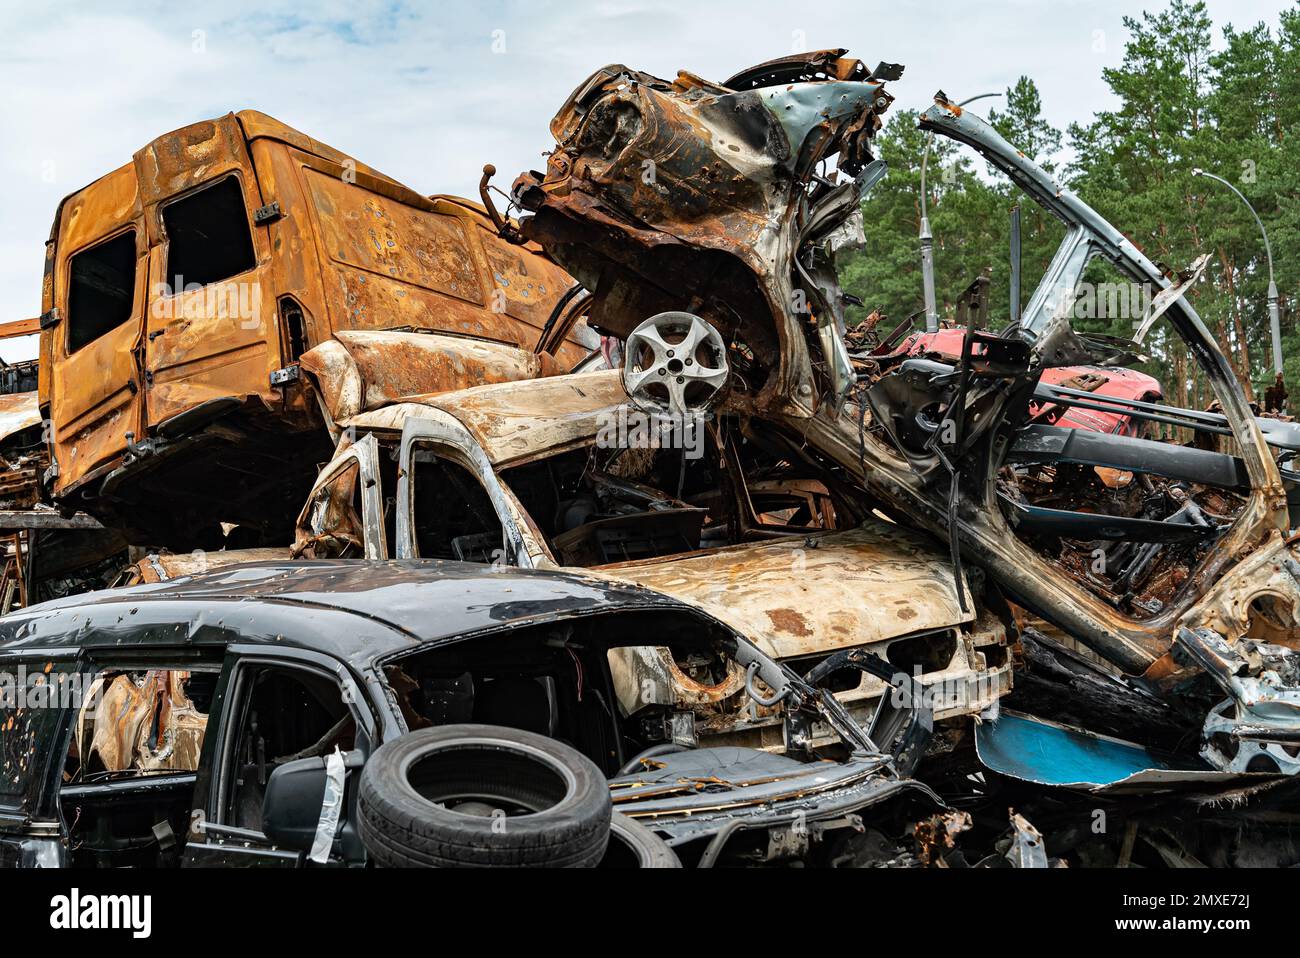 Consequences of the war in Ukraine - destroyed cars in Irpin, Bucha district. Stock Photo